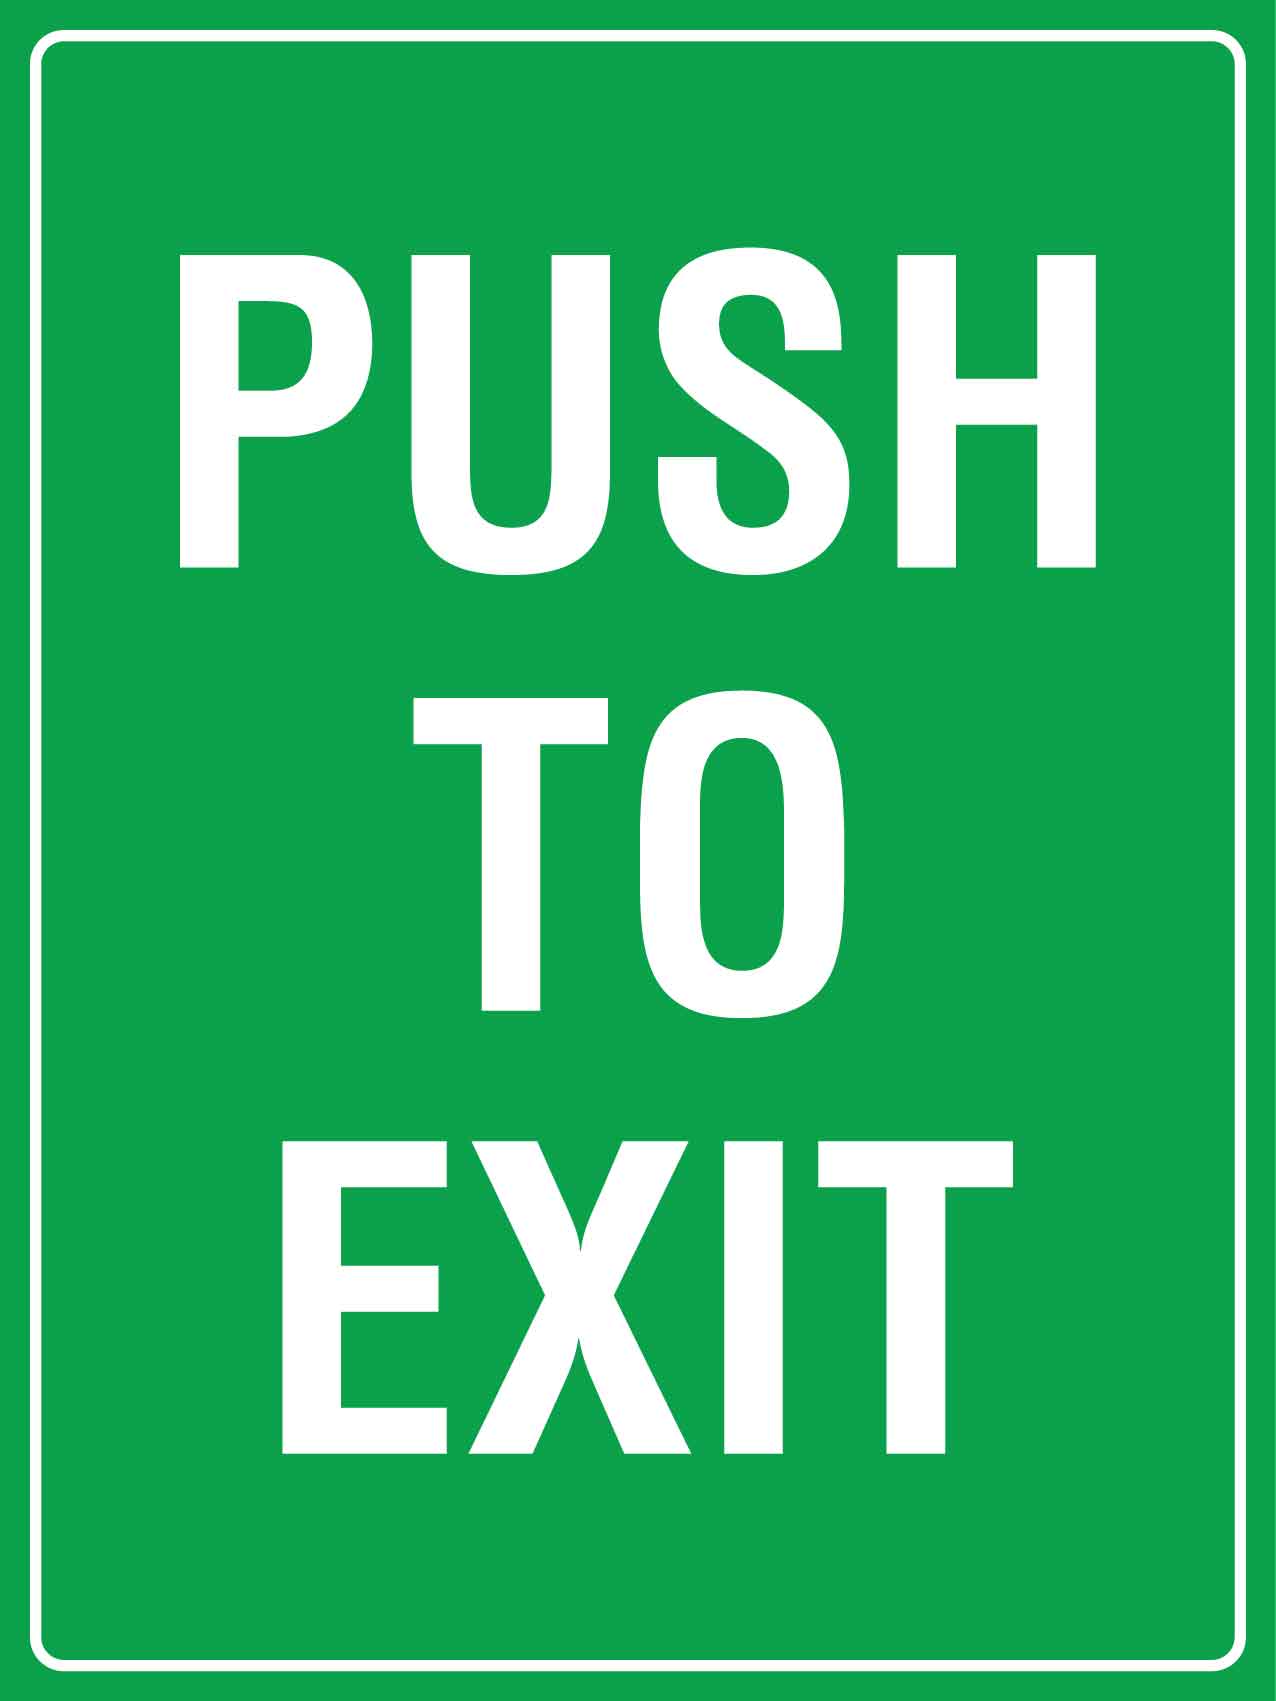 Push To Exit Sign